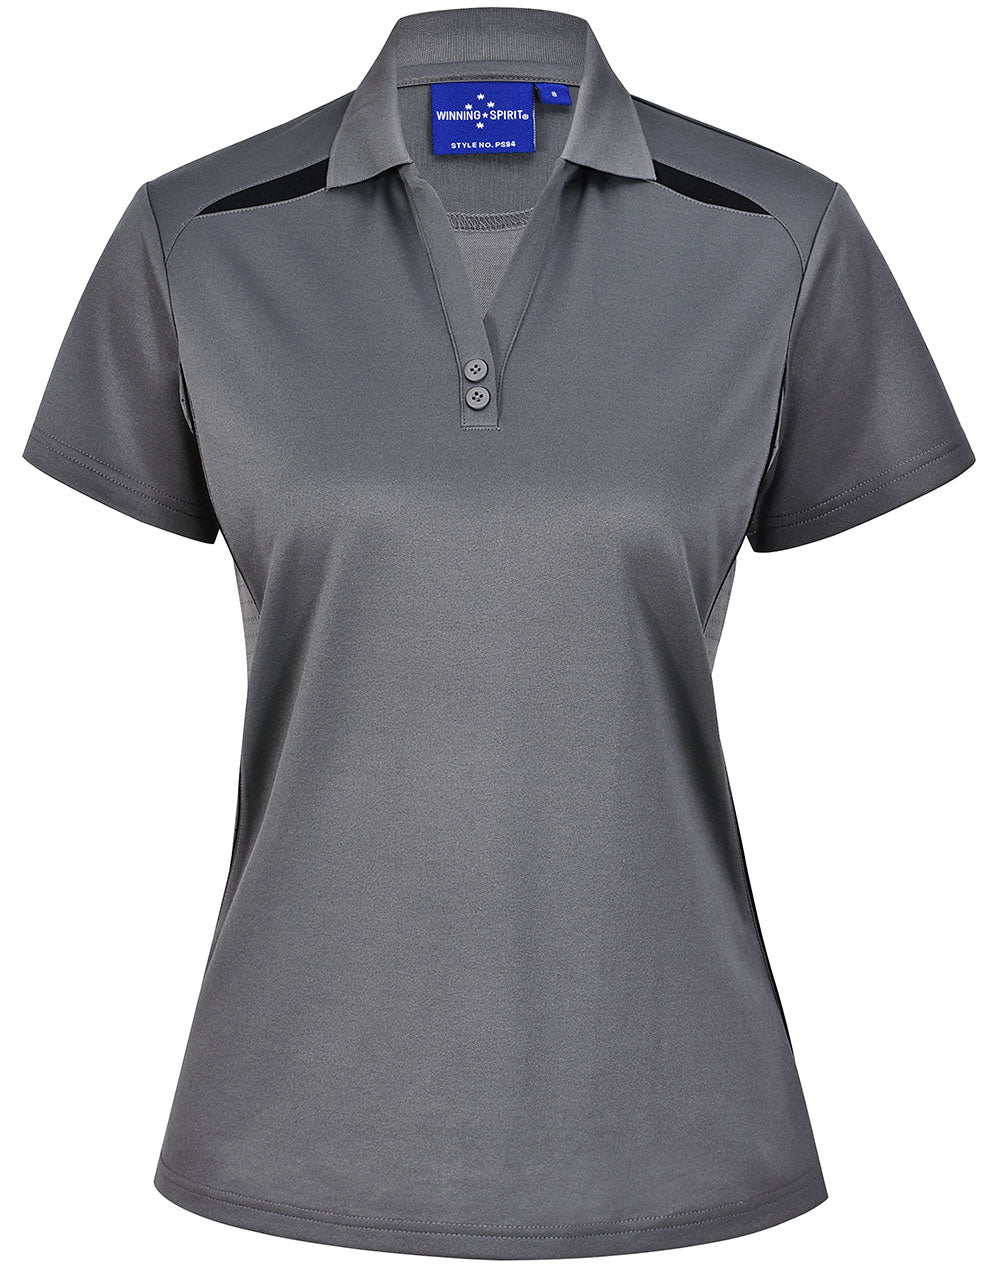 Winning Spirit Ladies Sustainable Poly/Cotton Contrast S/S Polo